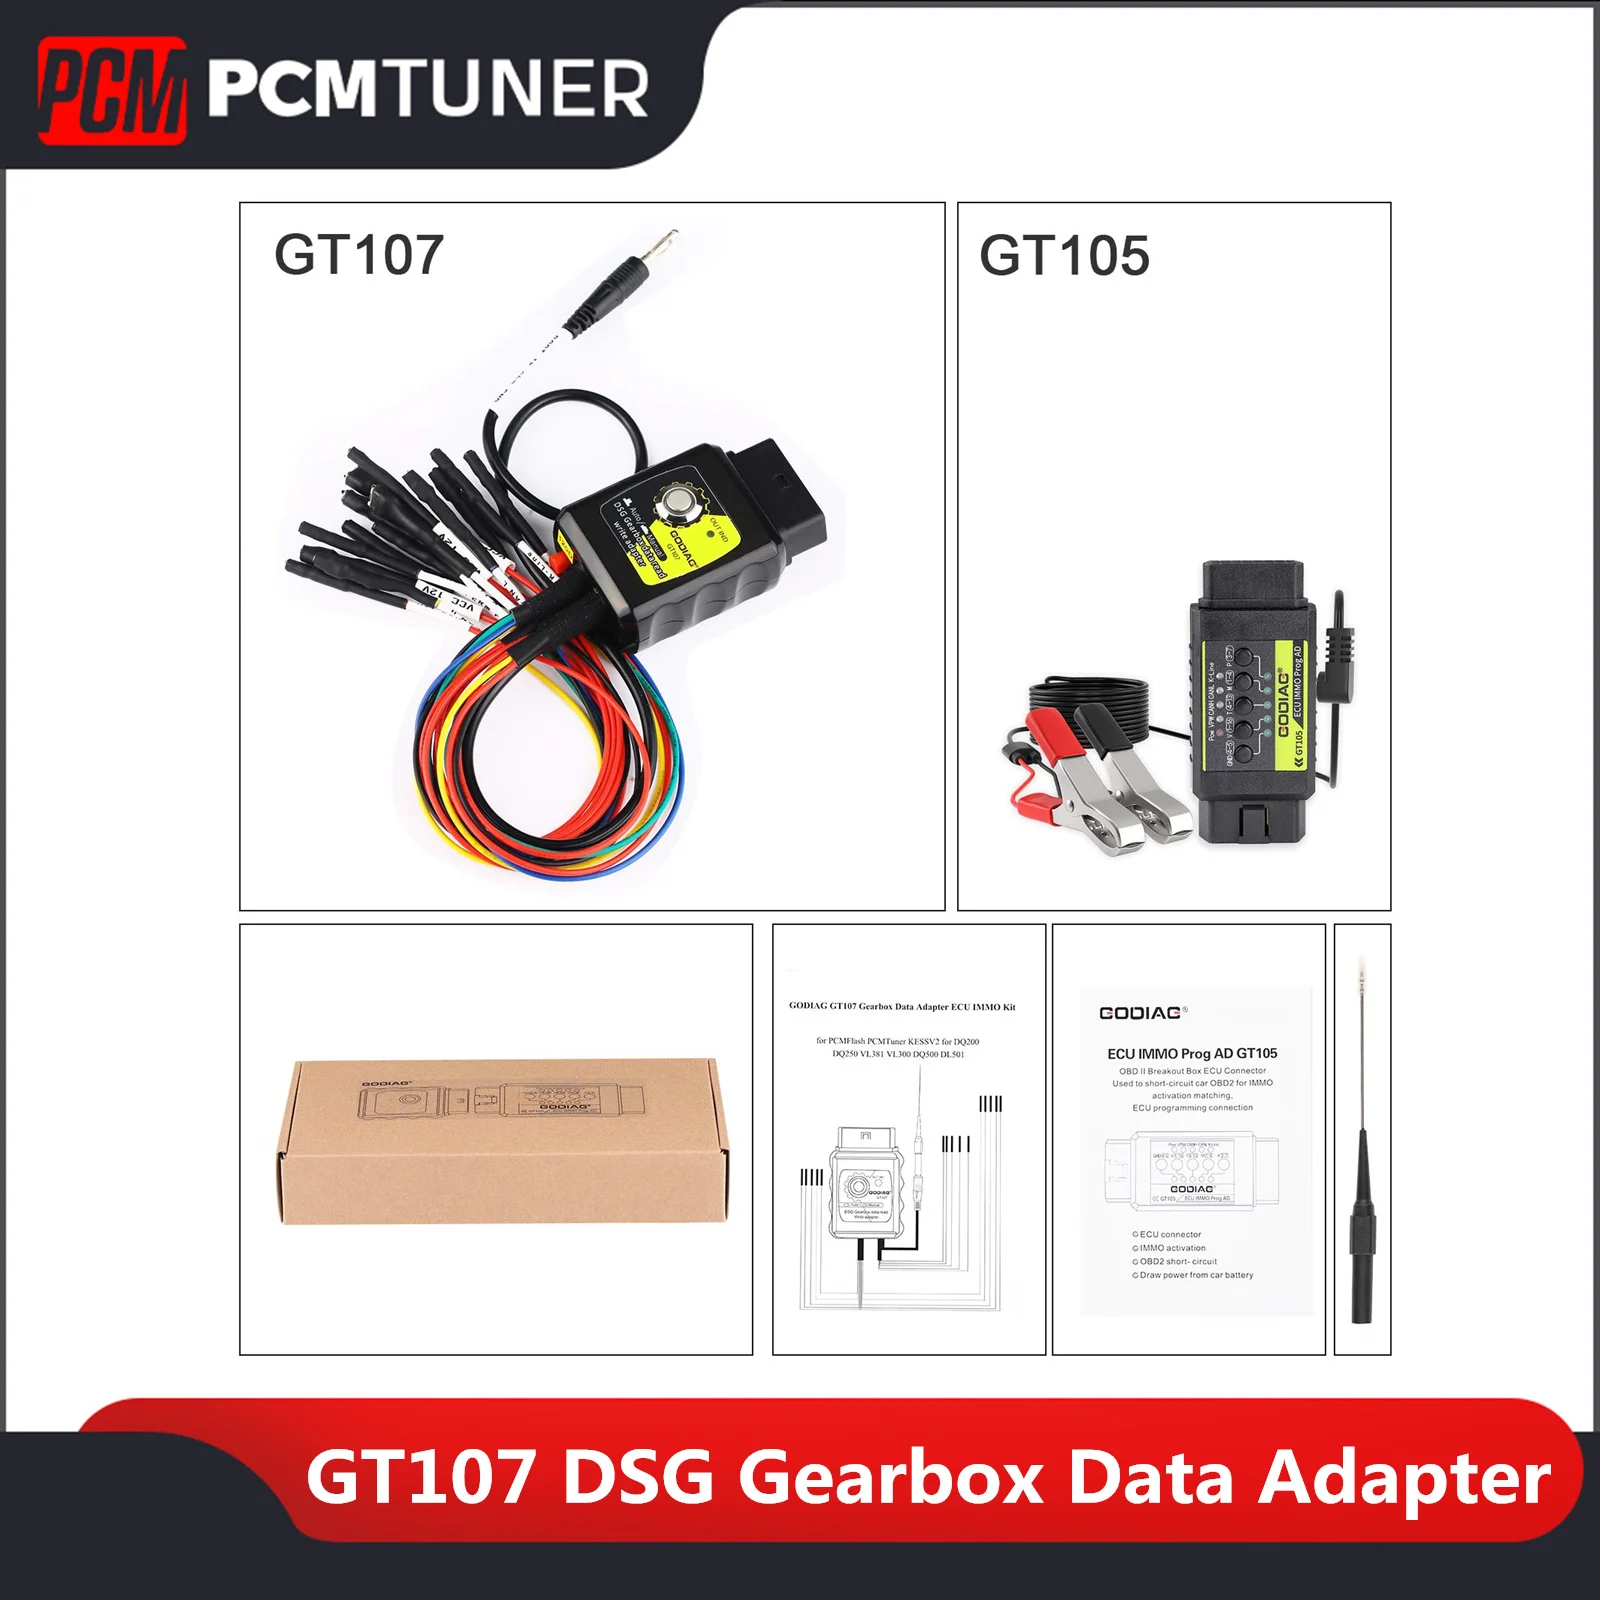 

Godiag GT107 DSG Gearbox Data Adapter ECU IMMO Kit for DQ250, DQ200, VL381, VL300, DQ500, DL501 Work With PCMtuner